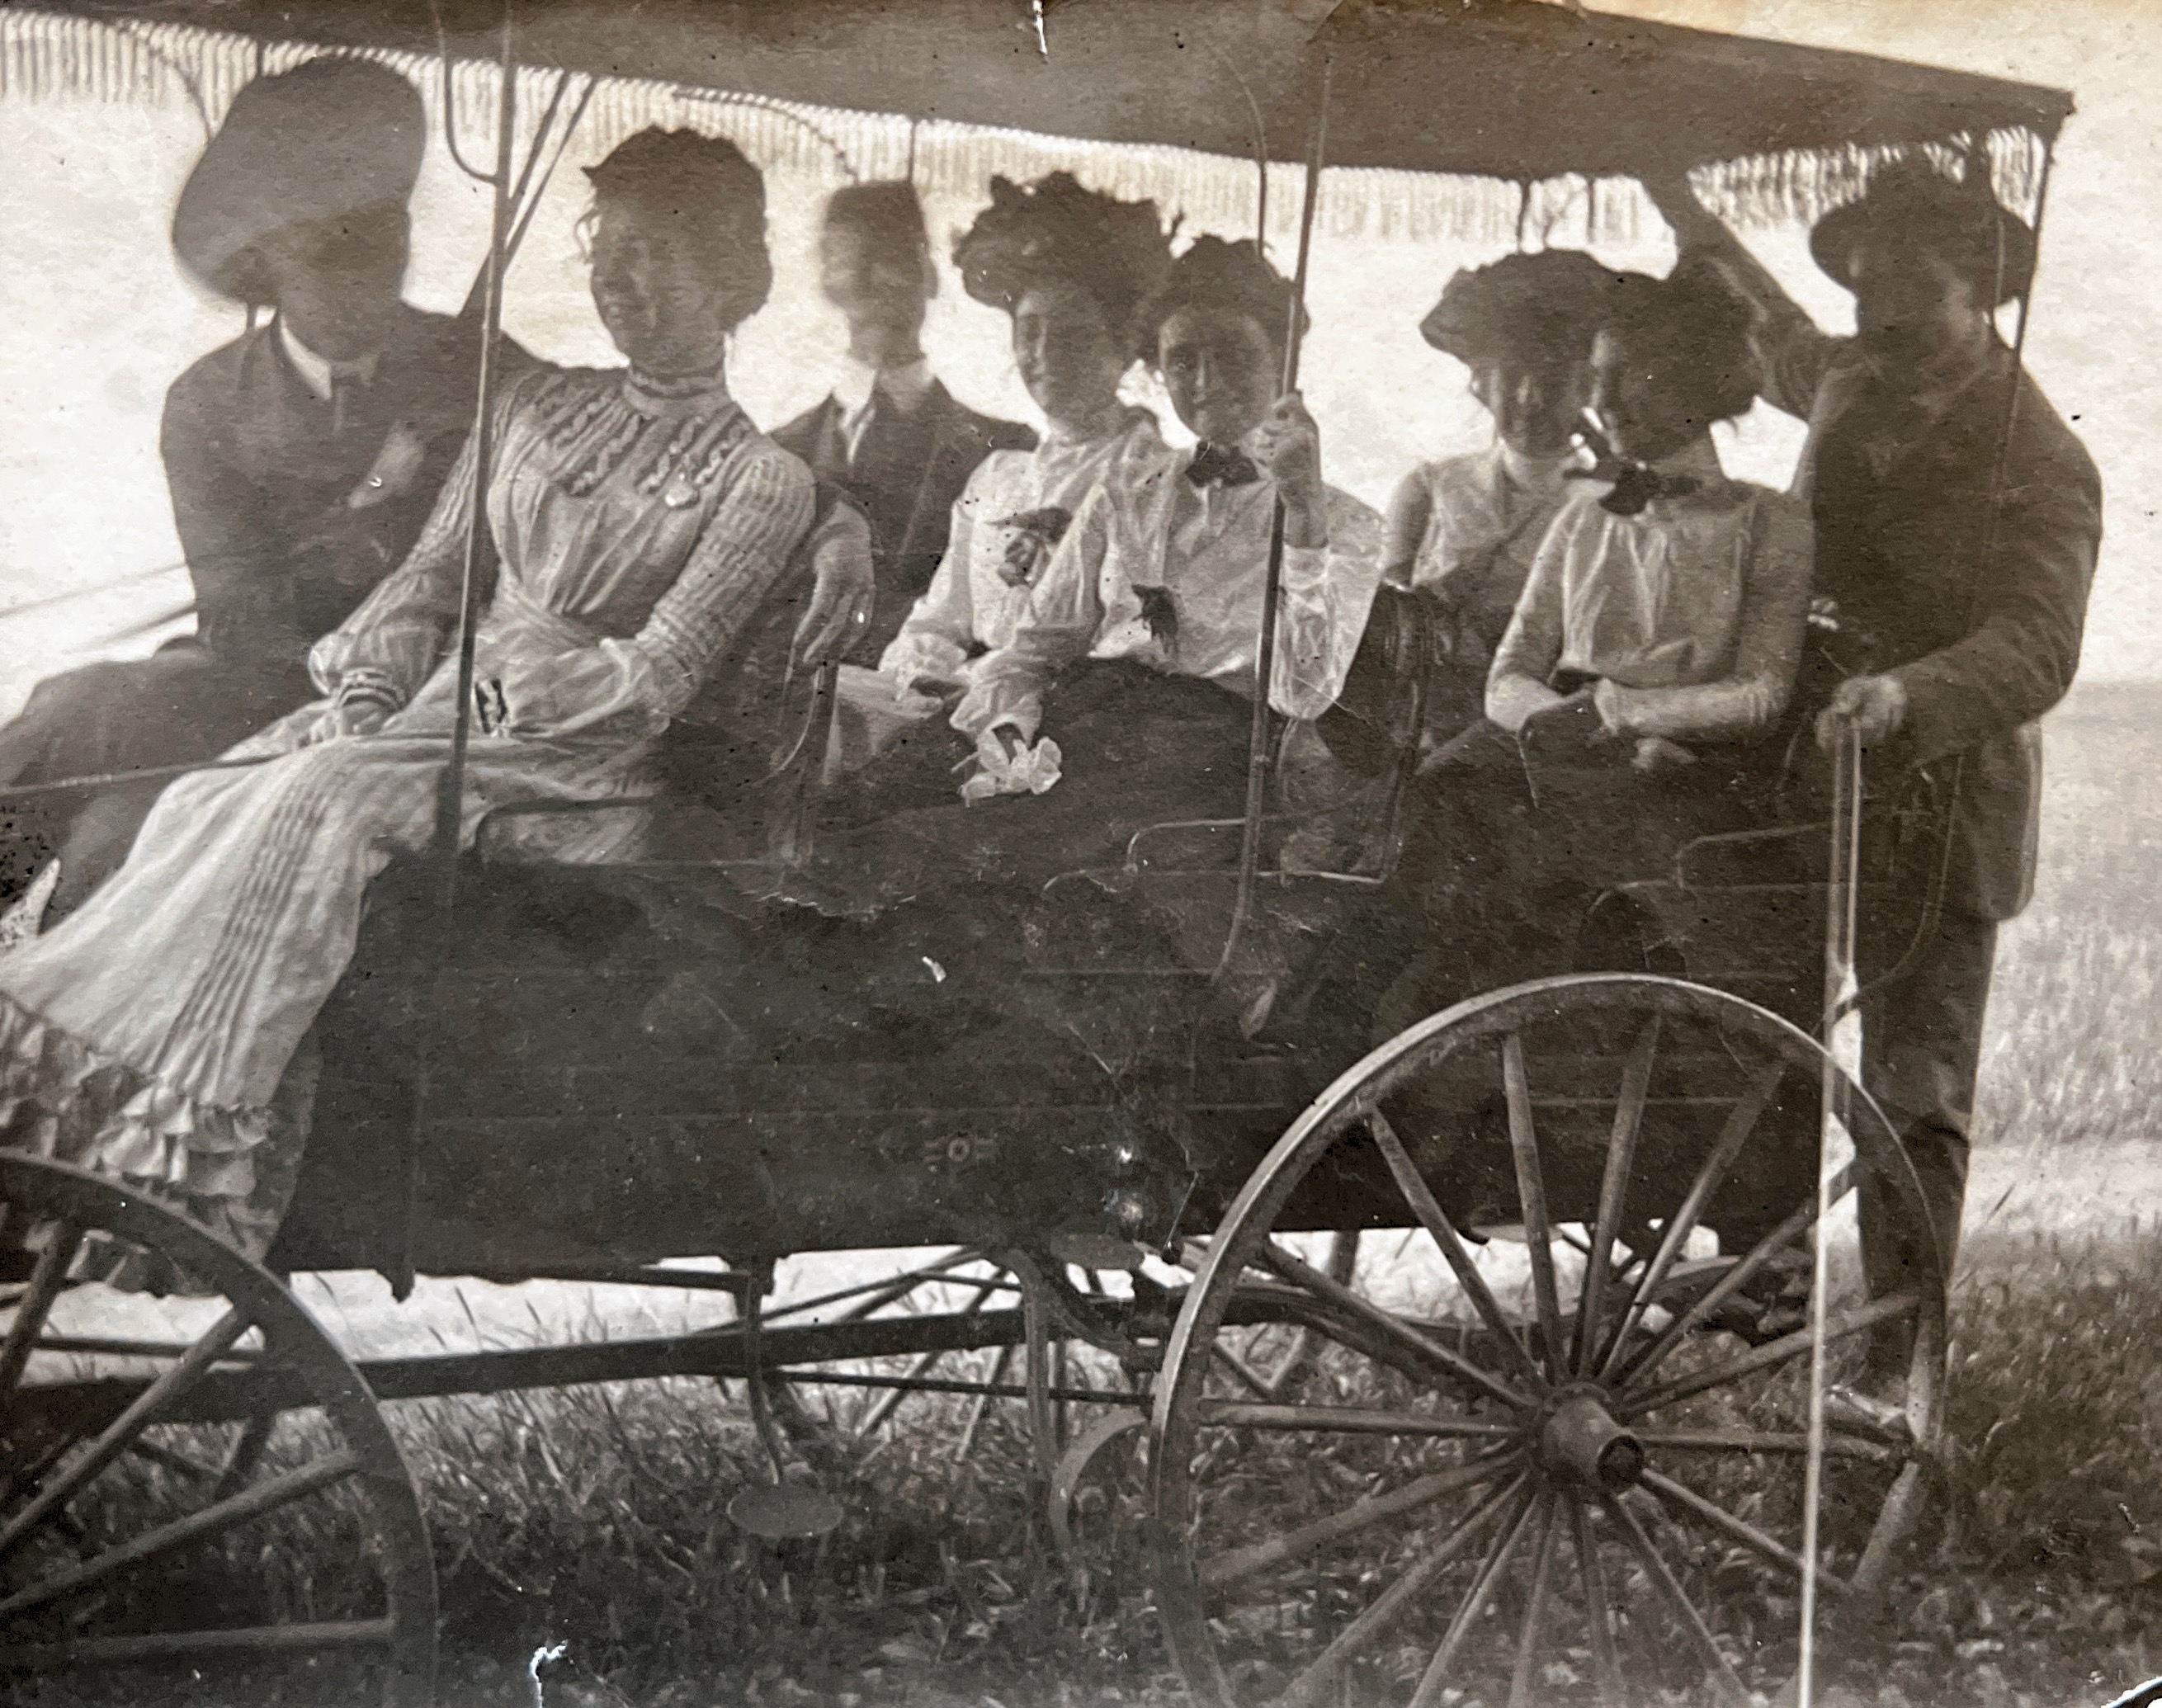 Horse and buggy ride with friends.  Hooper, Nebraska 1902.